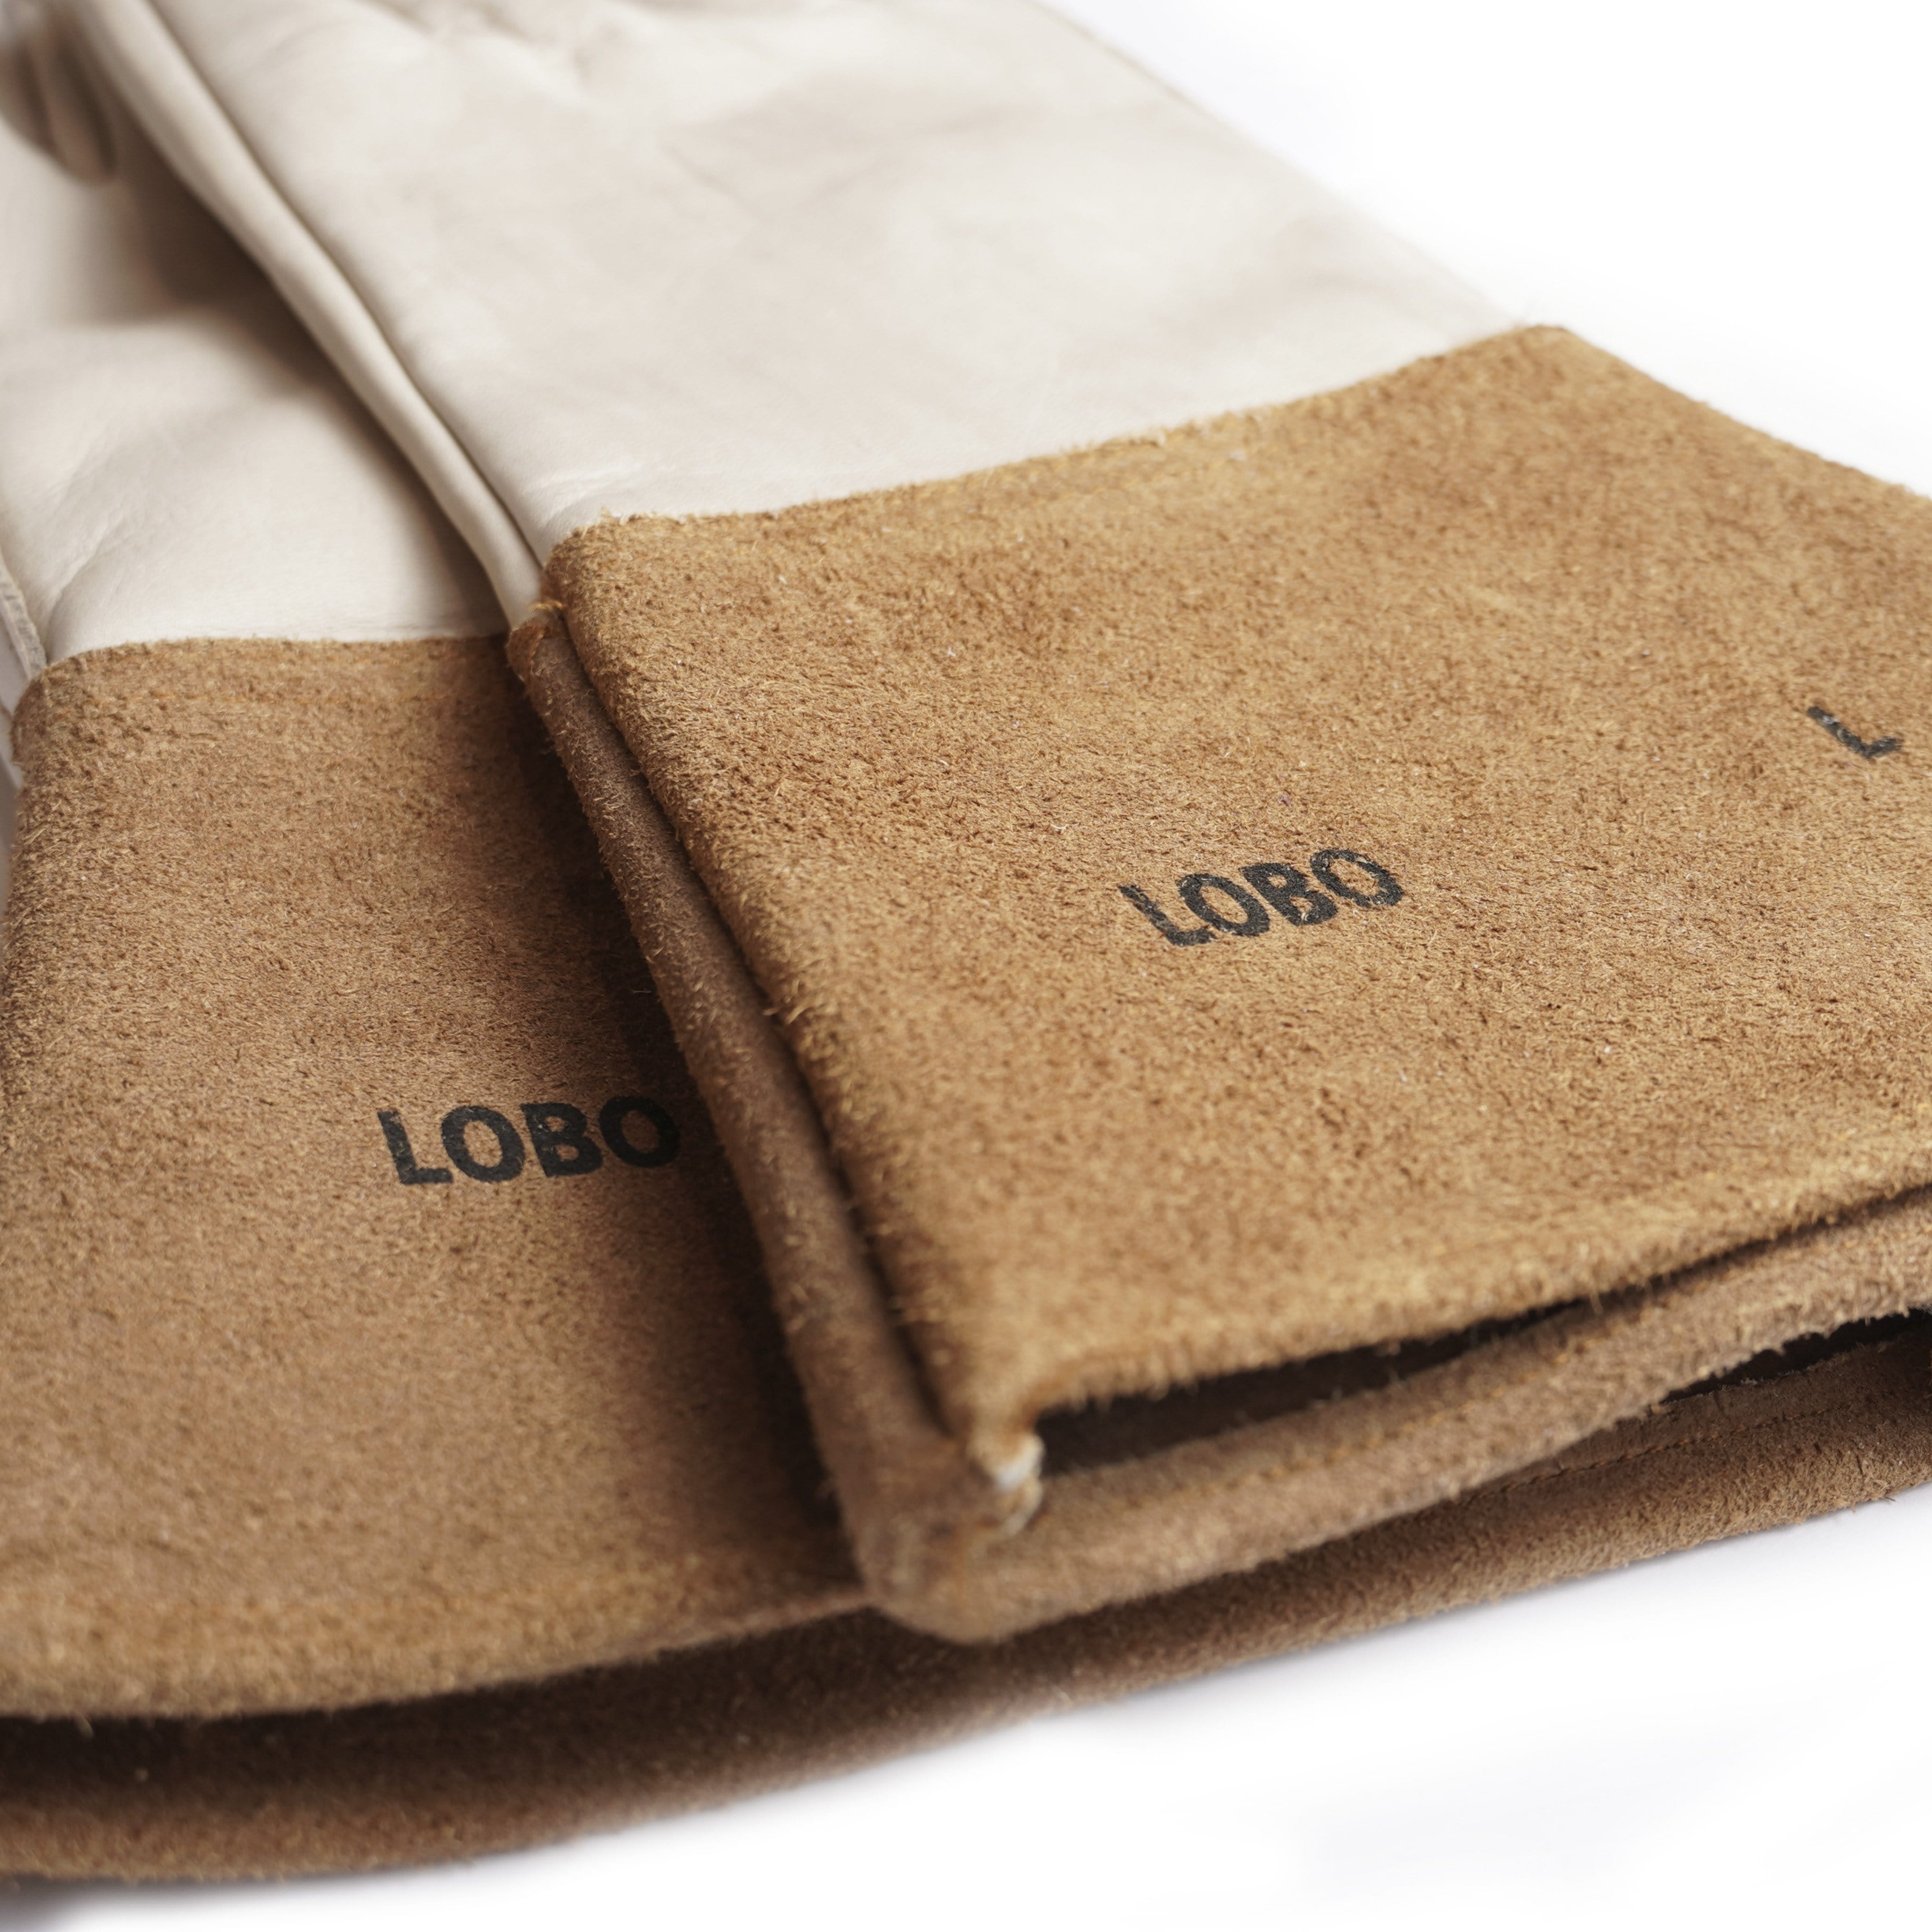 Lobo Comfort - Thorn Resistant Gloves -  Cowhide Leather